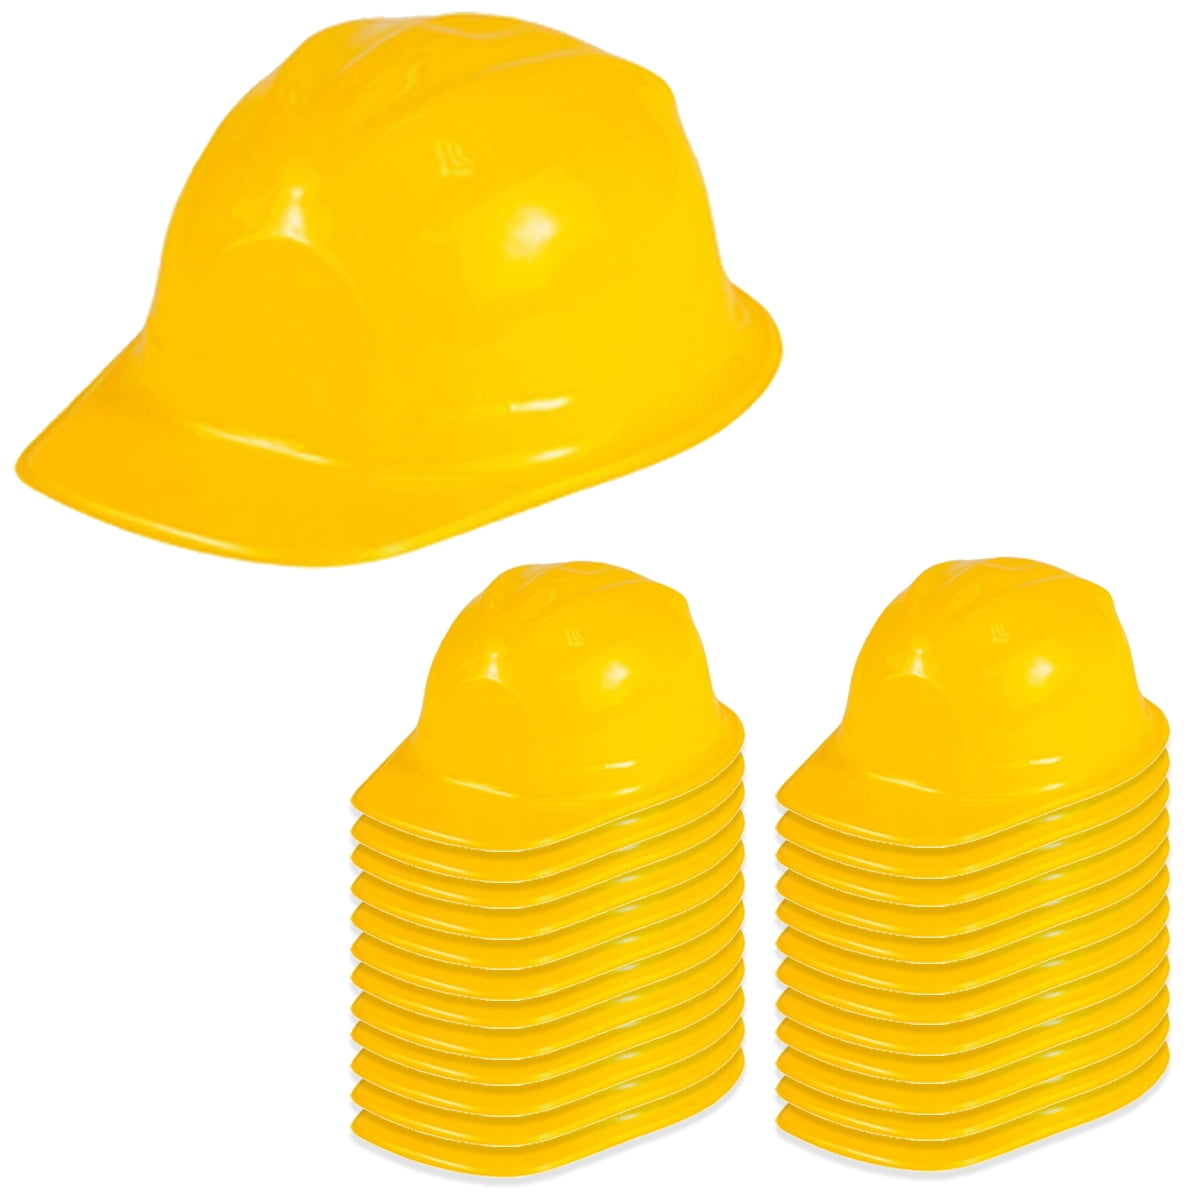 US Toy Construction Party Hard Hat pack of 12 yellow for sale online 